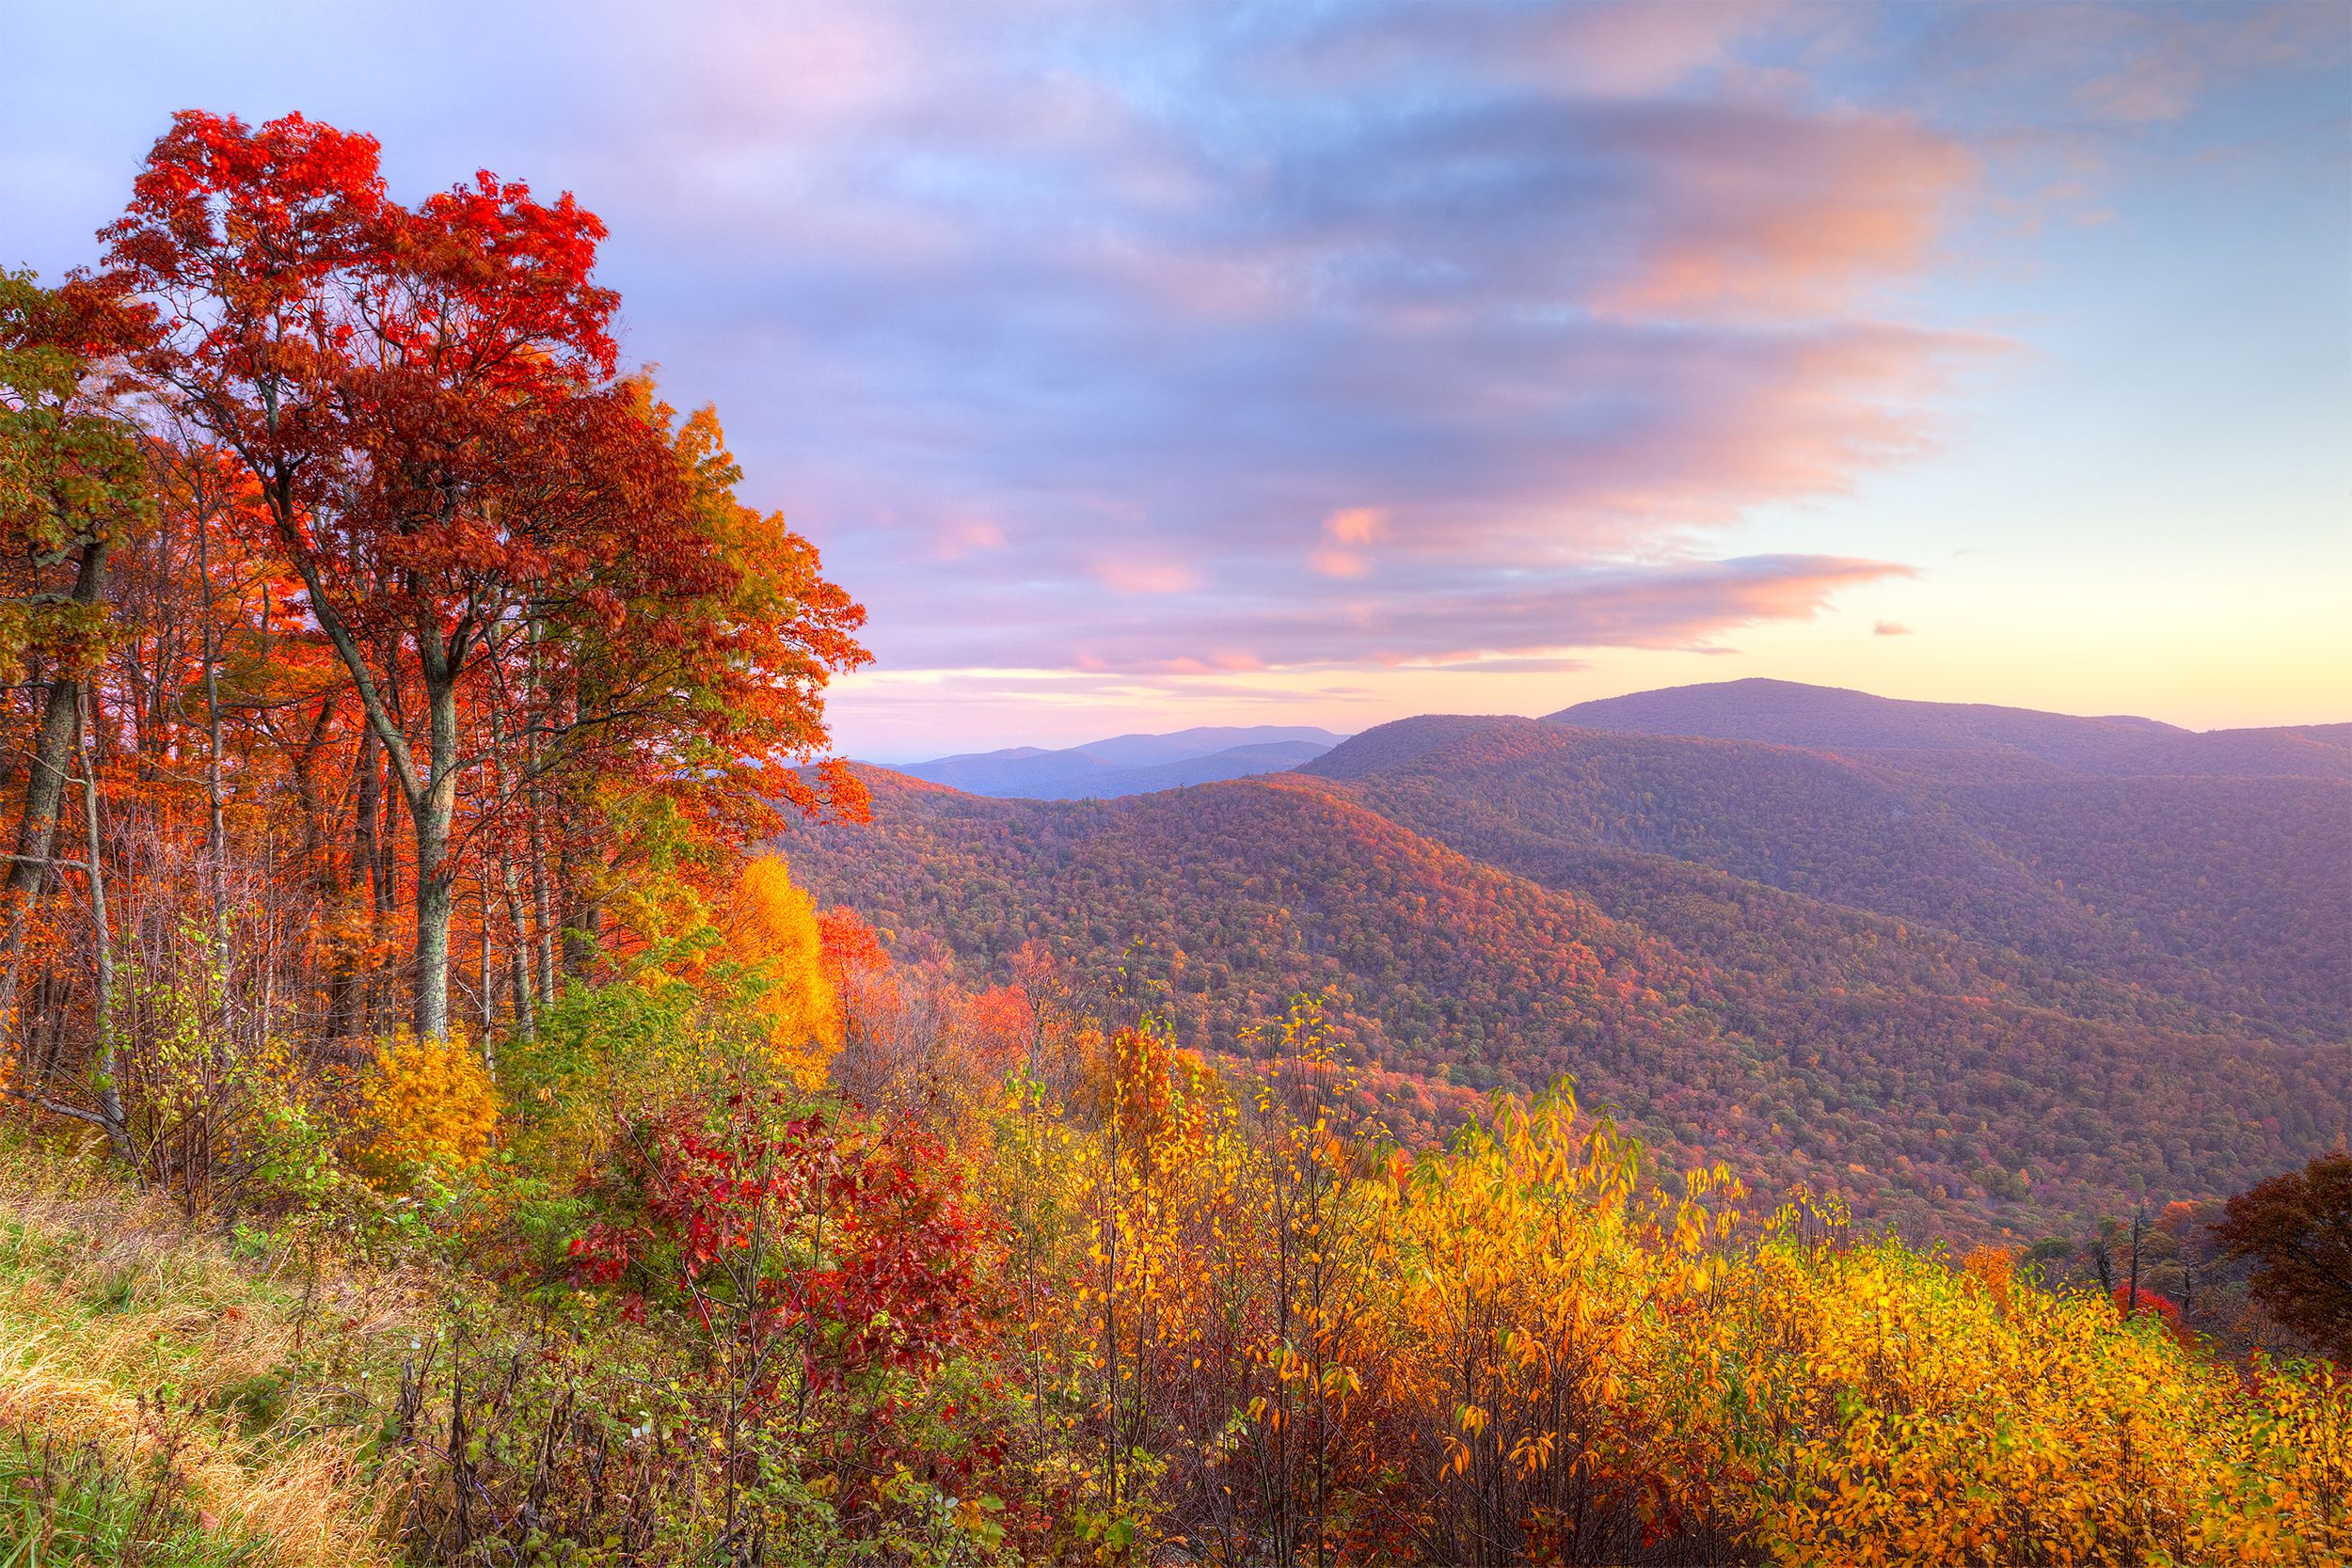 <p>Less than 100 miles from the nation's capital, nature lovers will find <a href="https://www.nps.gov/shen/index.htm">200,000 acres of protected land</a> that features waterfalls, expansive vistas, and peaceful woodlands. Its famed Skyline Drive, punctuated by panoramic views from overlooks, runs 105 miles. The park's expansive and uninterrupted swath of nature is also a haven for deer and home to everything from bears to songbirds. </p>